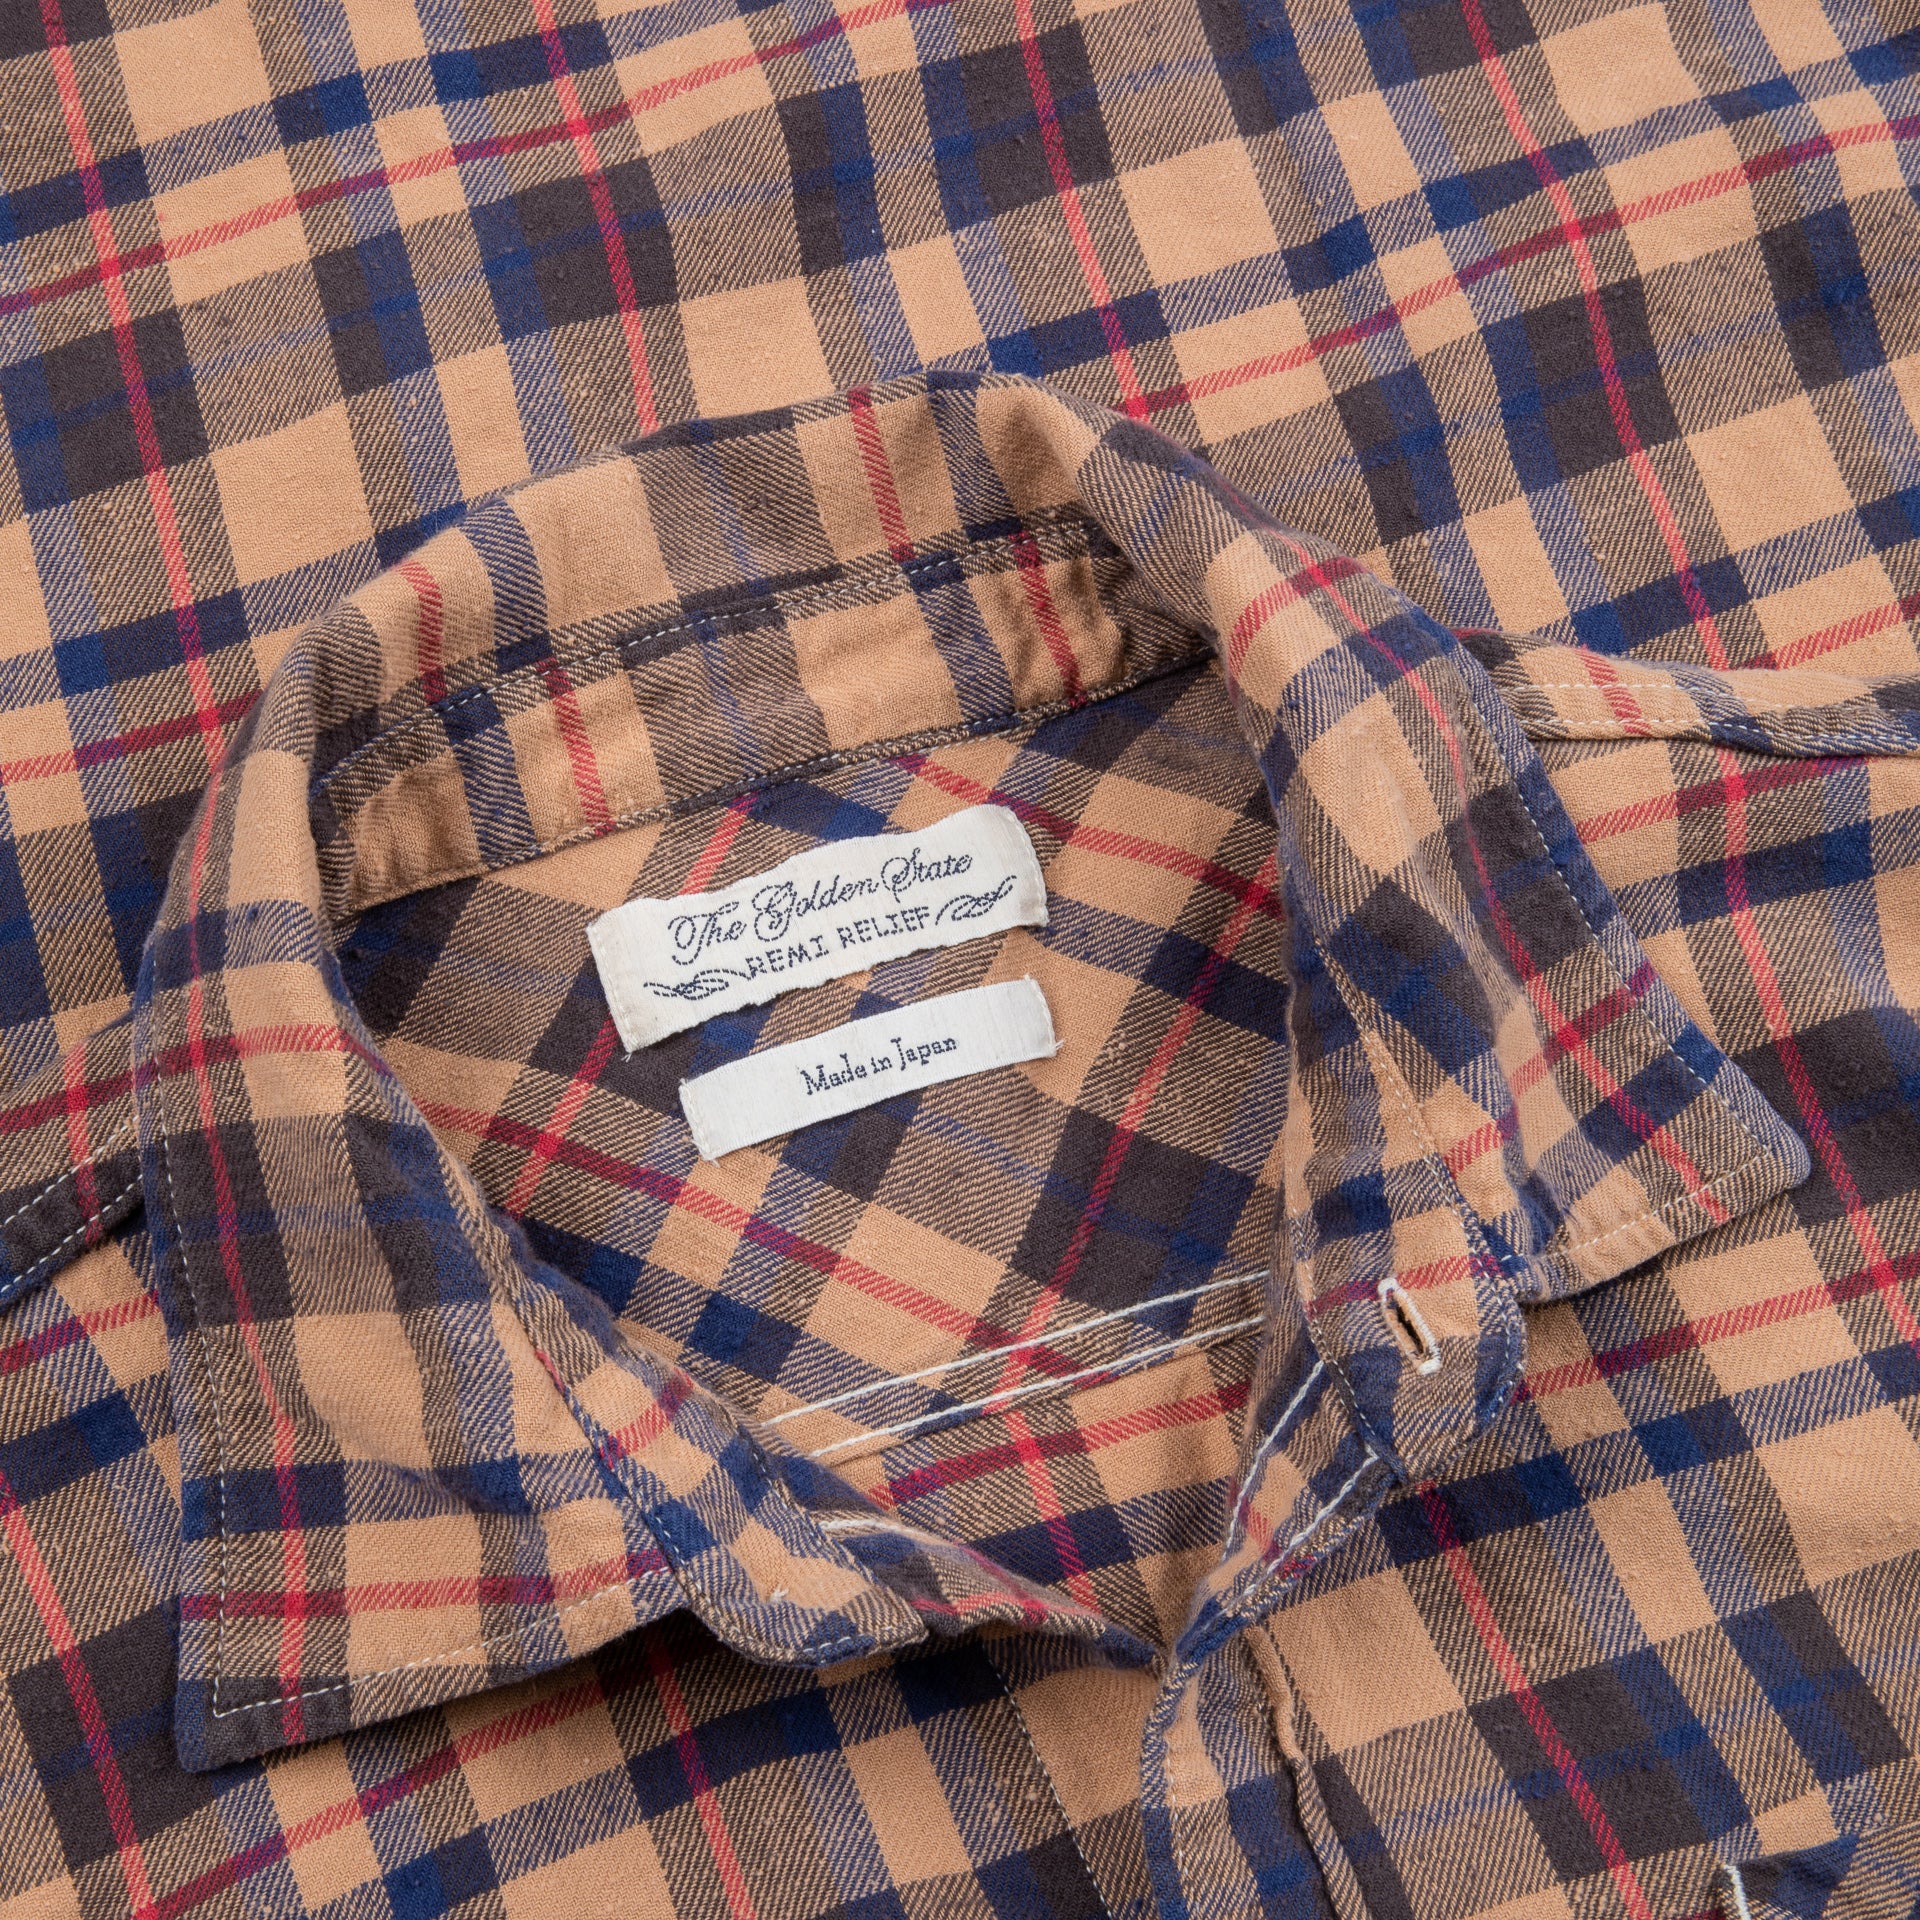 Remi Relief Checked regular shirt Moccha